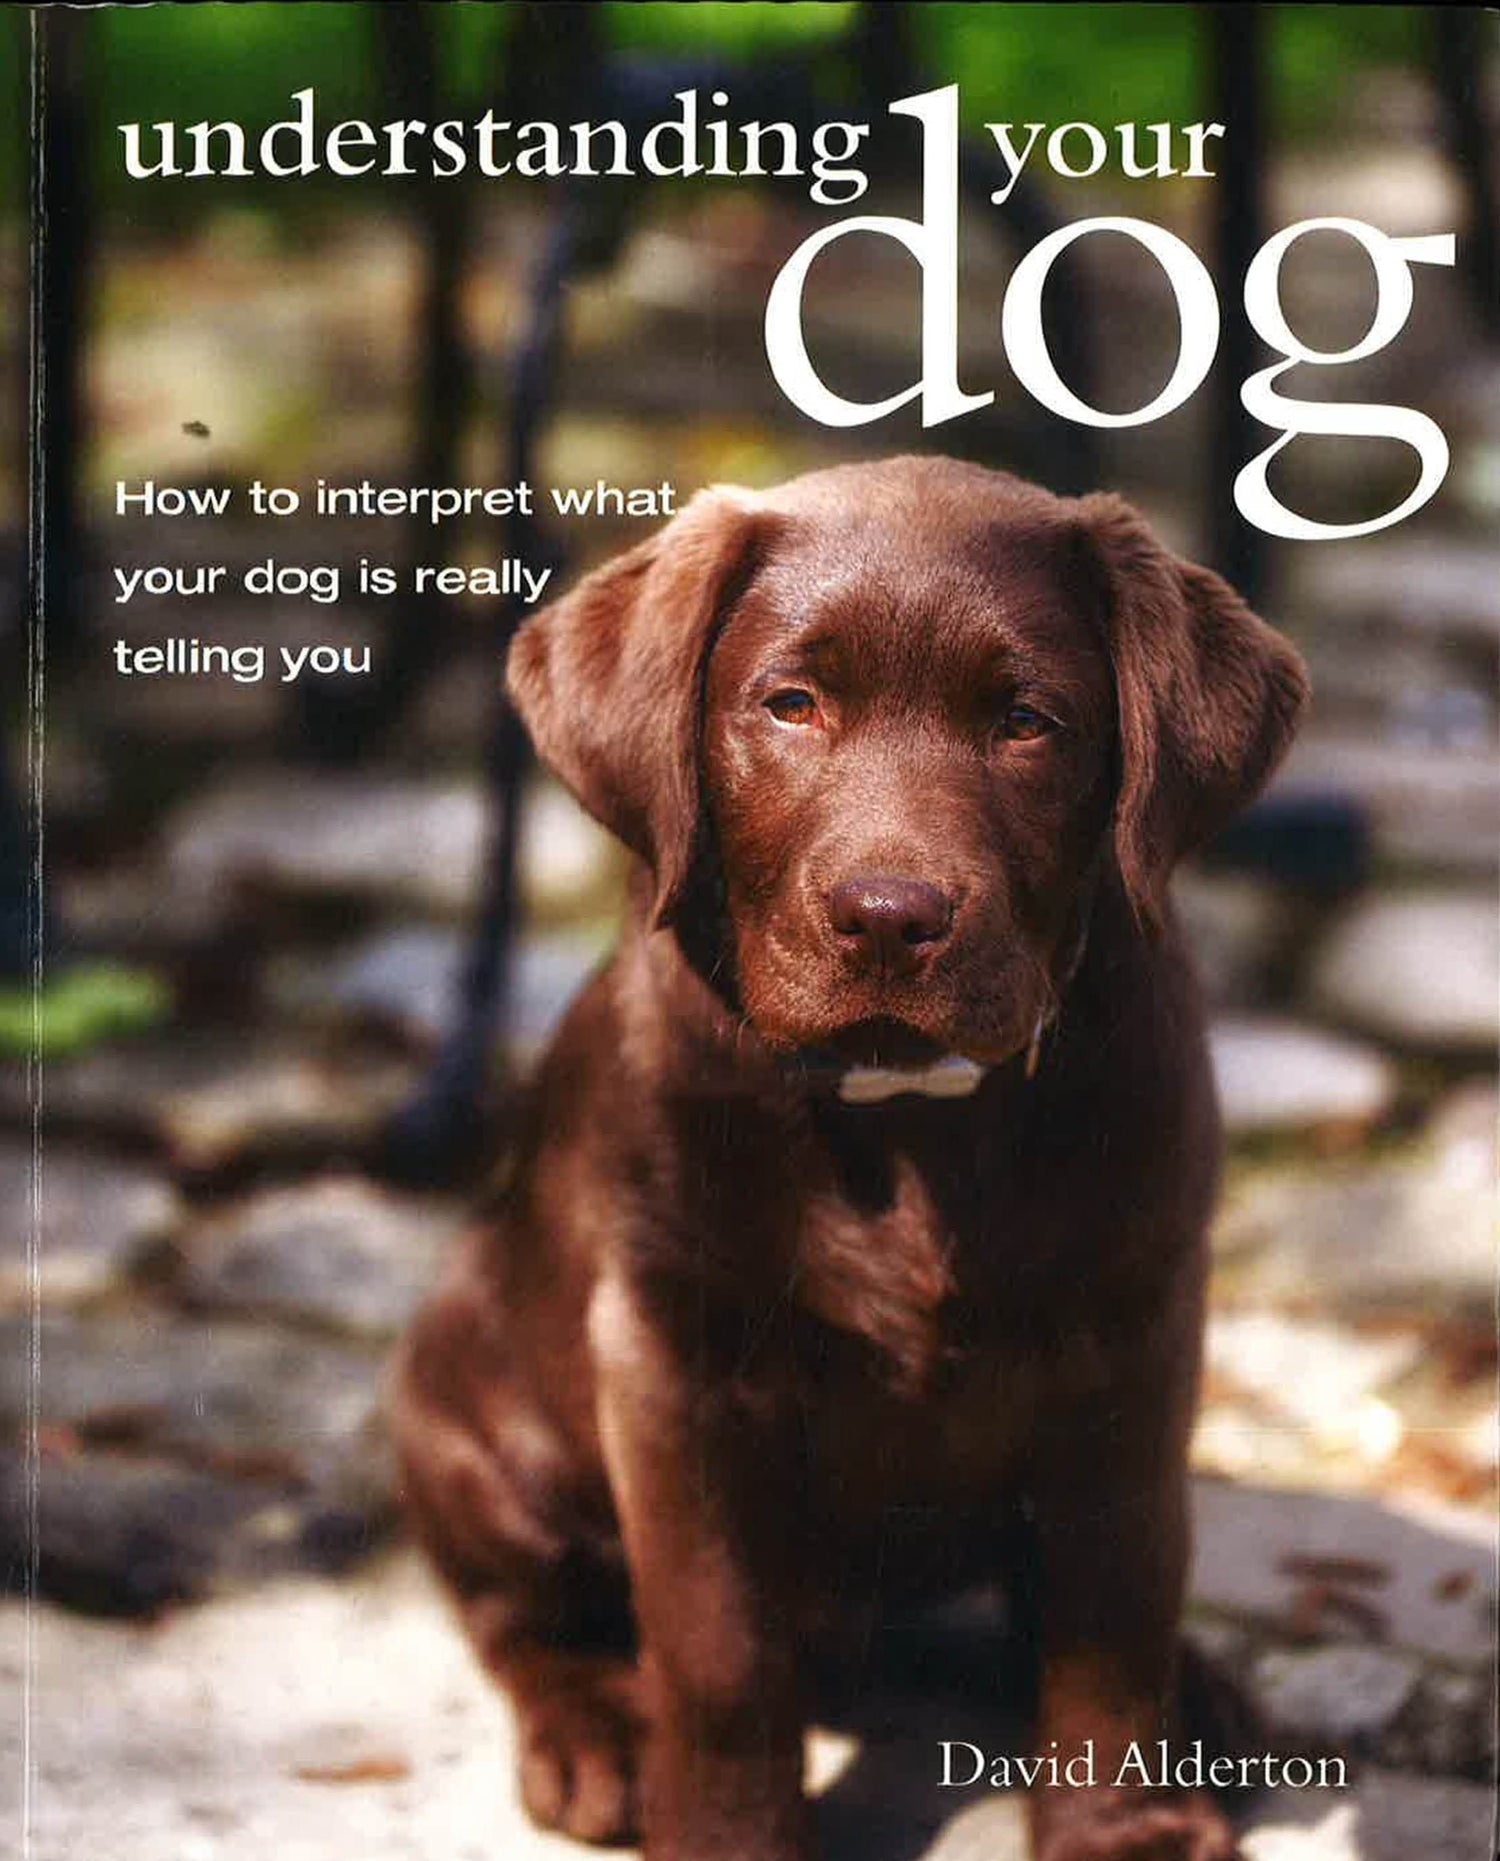 Understanding Your Dog: How To Interpret What Your Dog Is Really Telling You